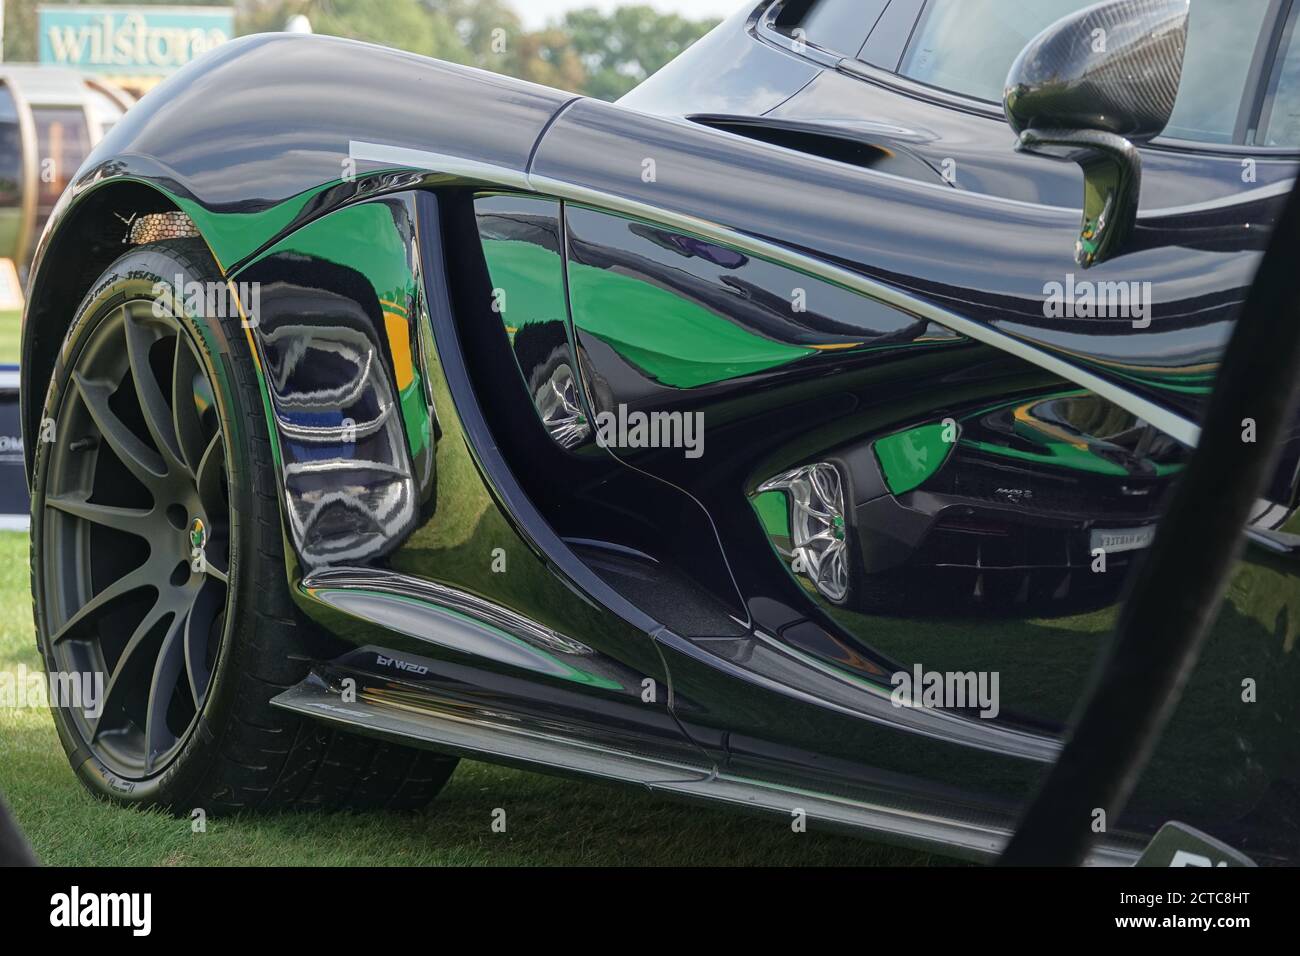 Blenheim Palace, Oxford, UK. 22nd Sep, 2020. McLaren Senns reflected in a brother black version At the famous Salon Prive held at Blenheim Palace Credit: Motofoto/Alamy Live News Stock Photo